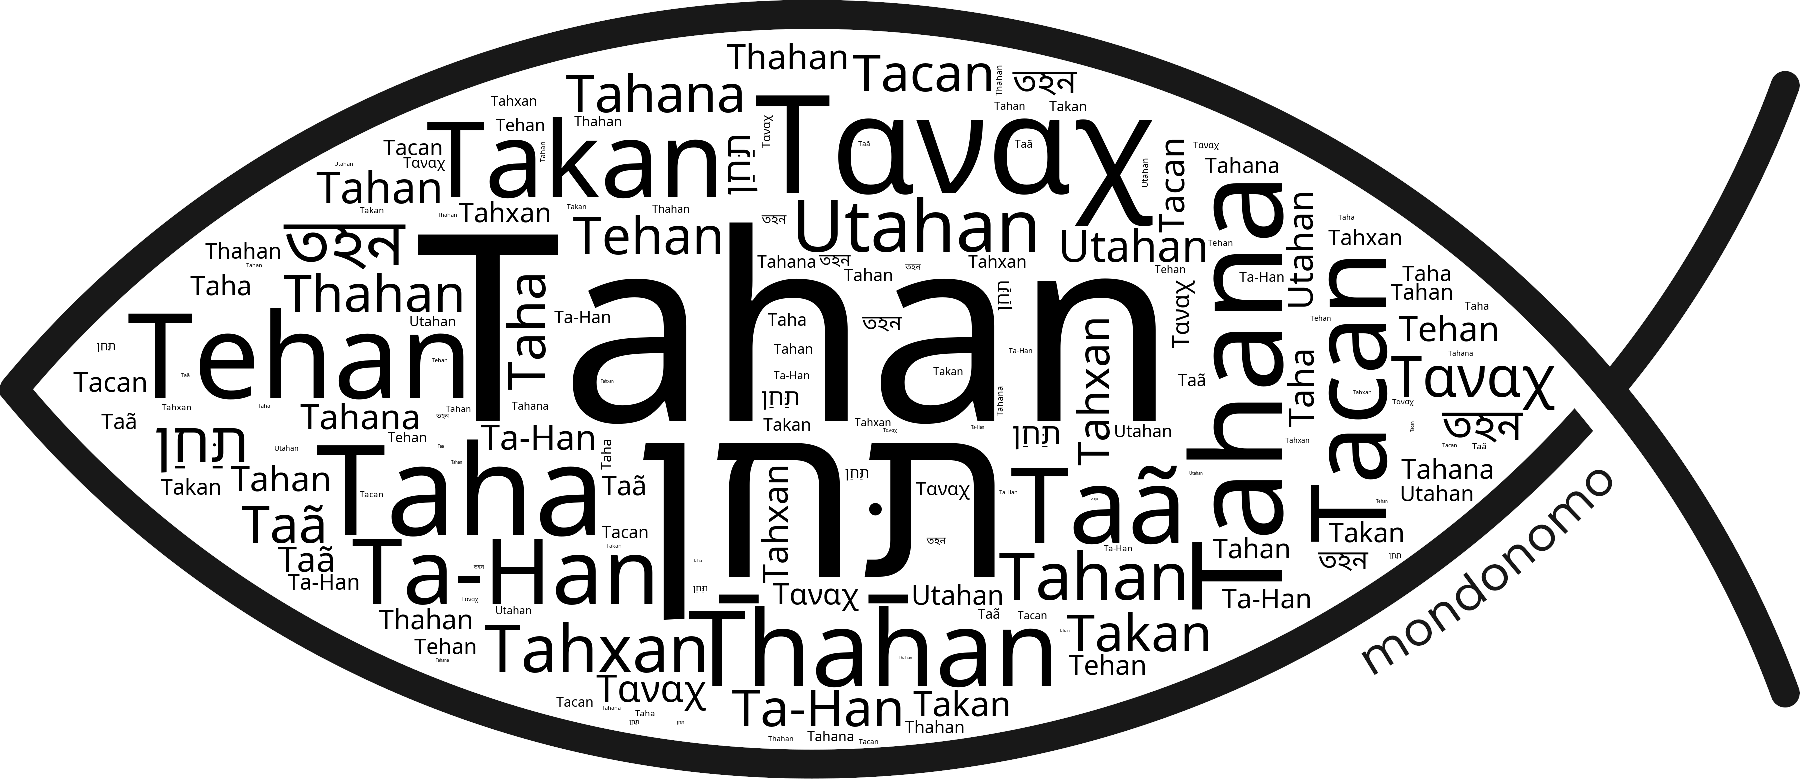 Name Tahan in the world's Bibles